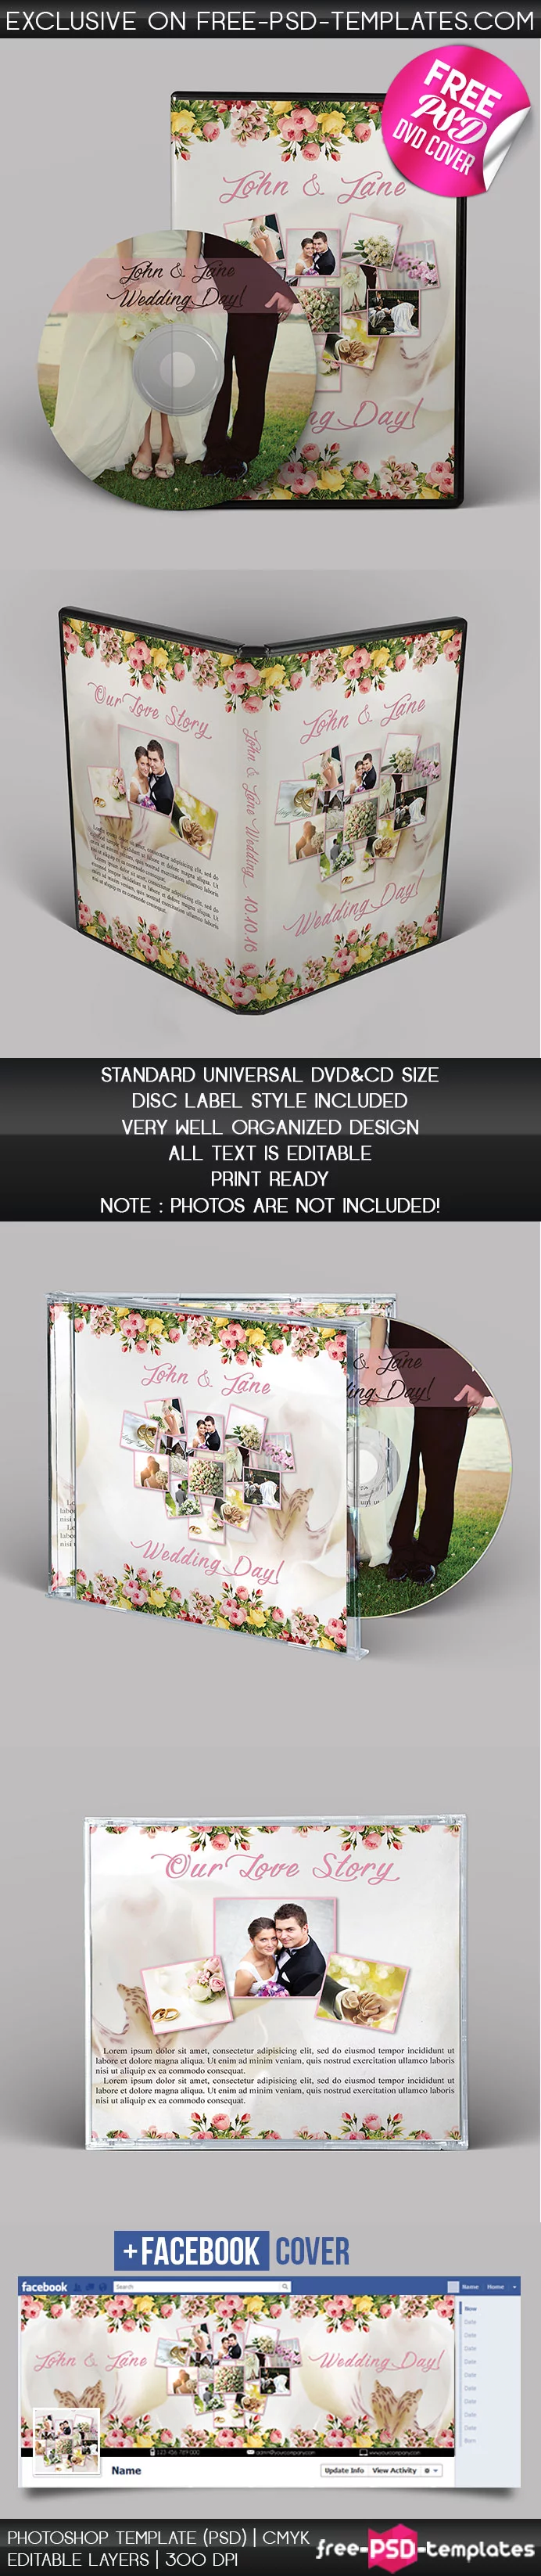 Preview_DVD_CD_cover_